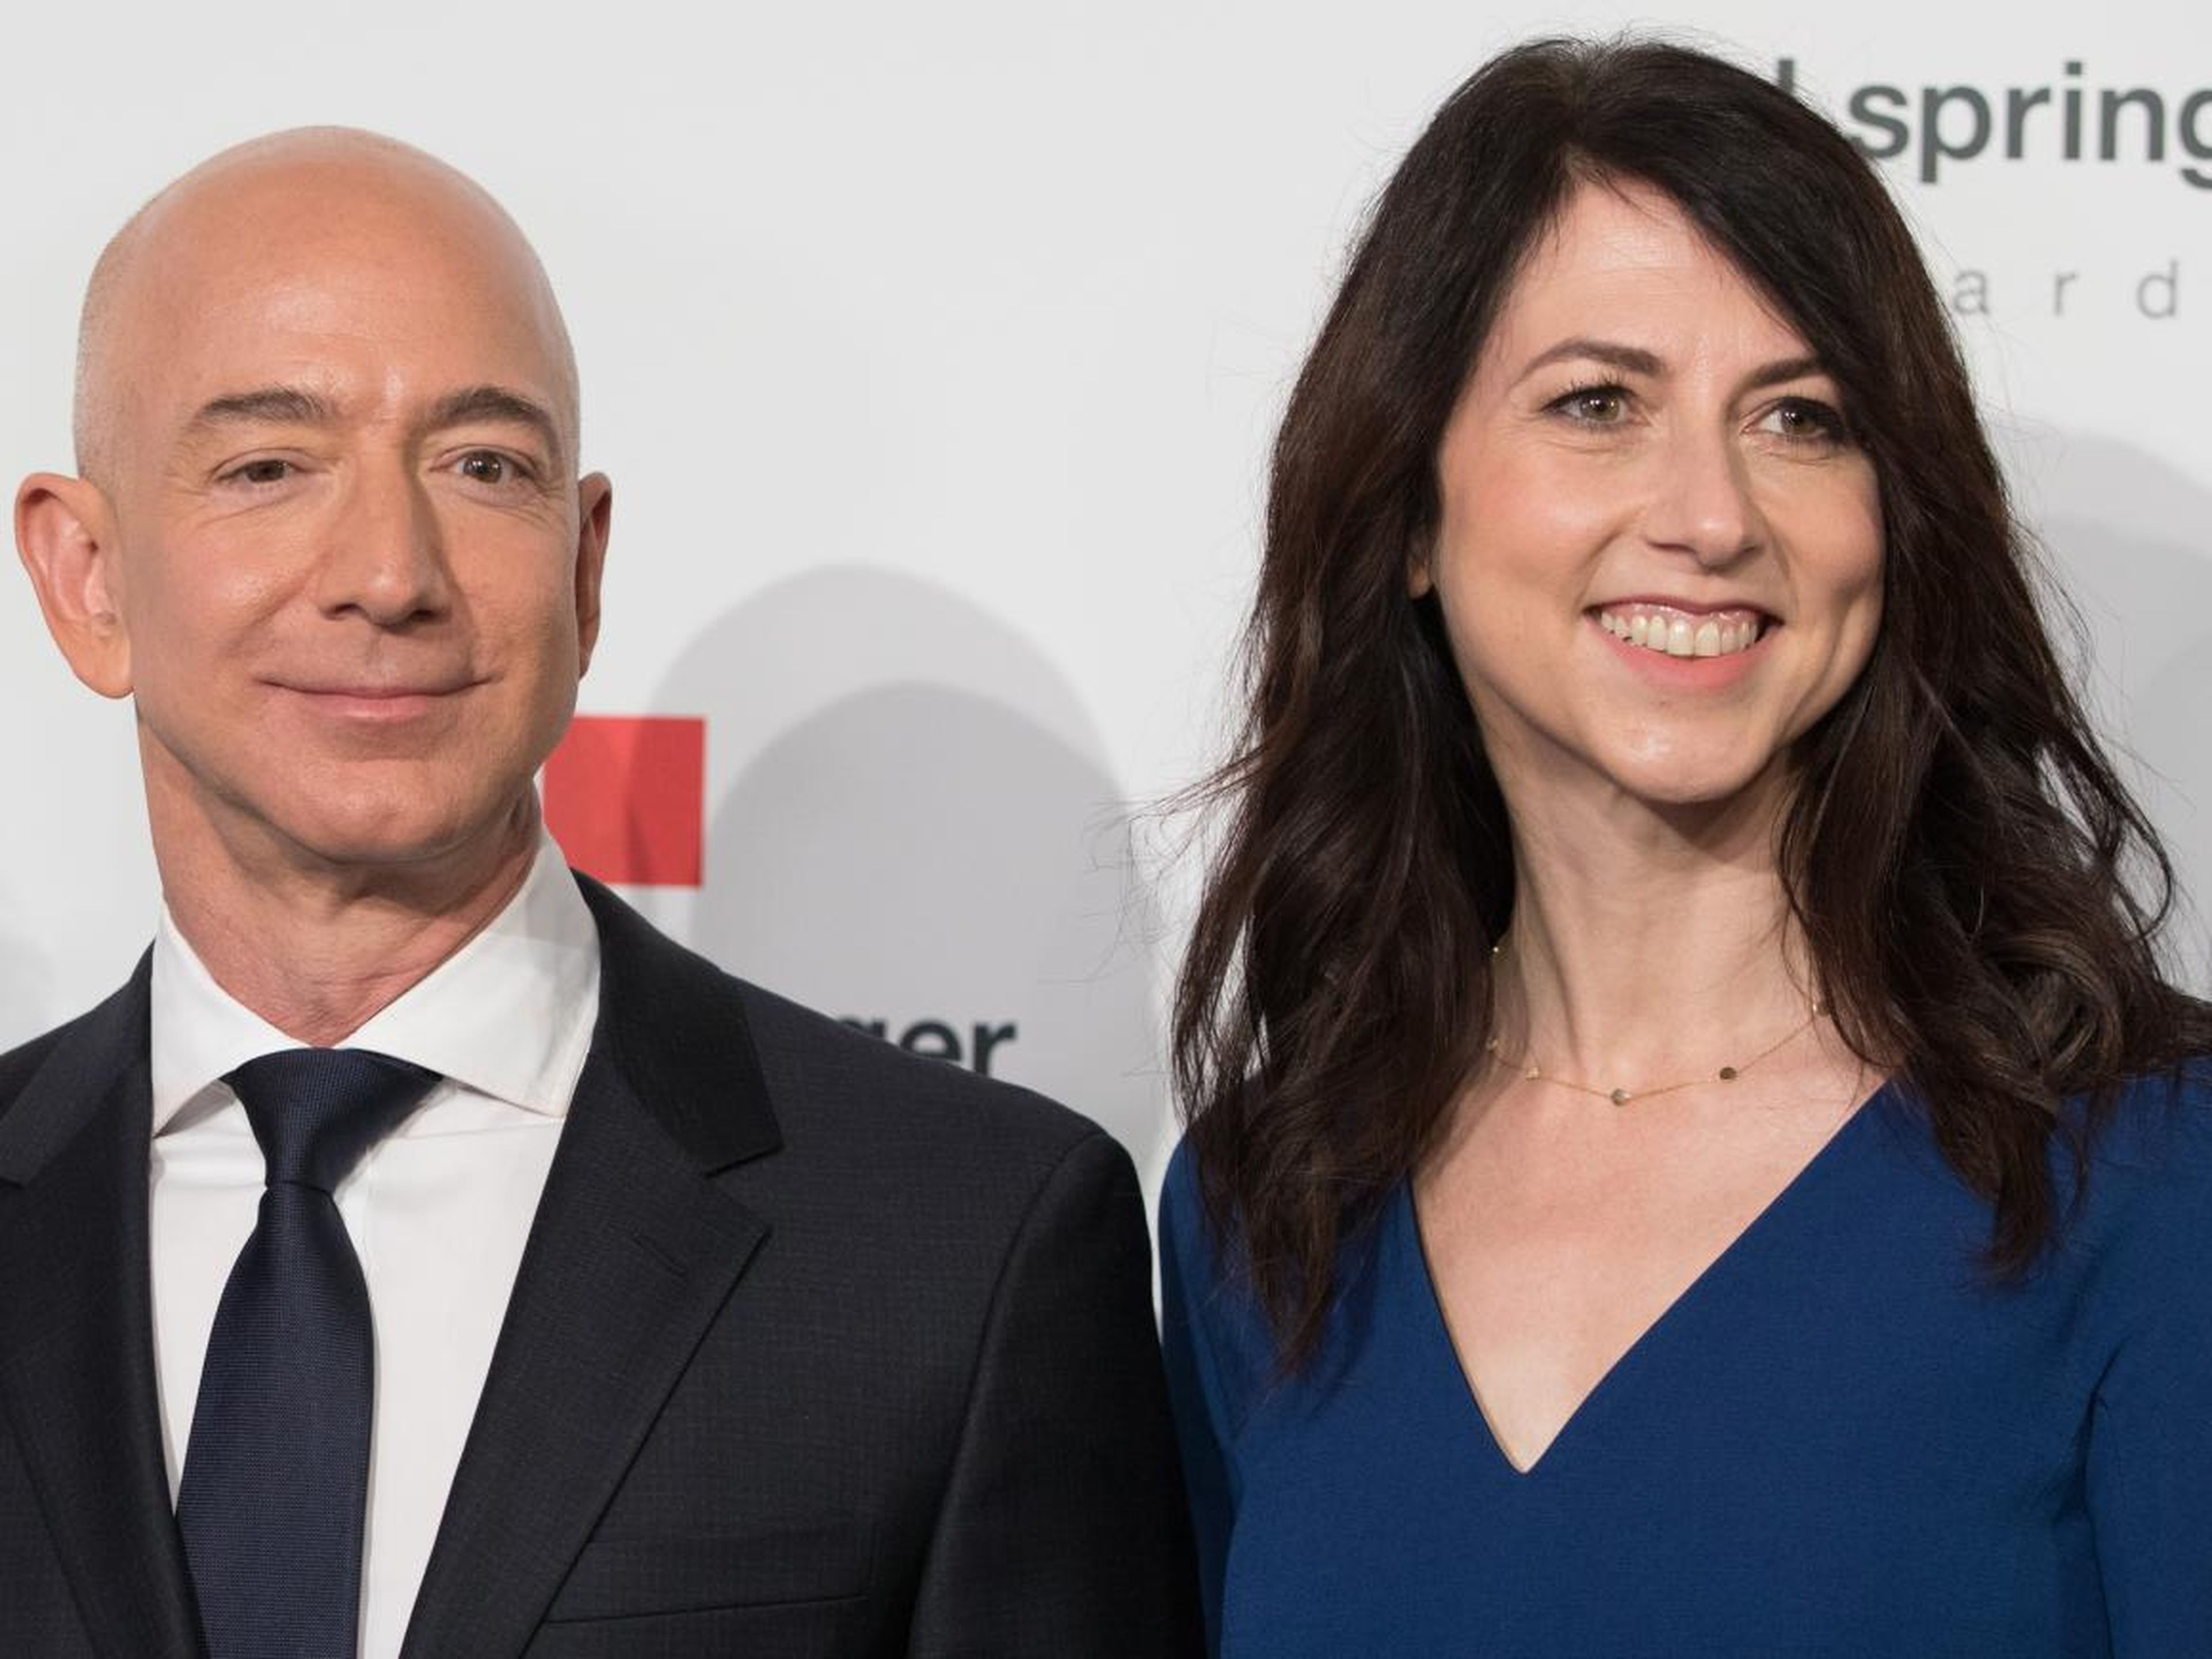 Jeff and MacKenzie Bezos both released Twitter statements on Thursday.